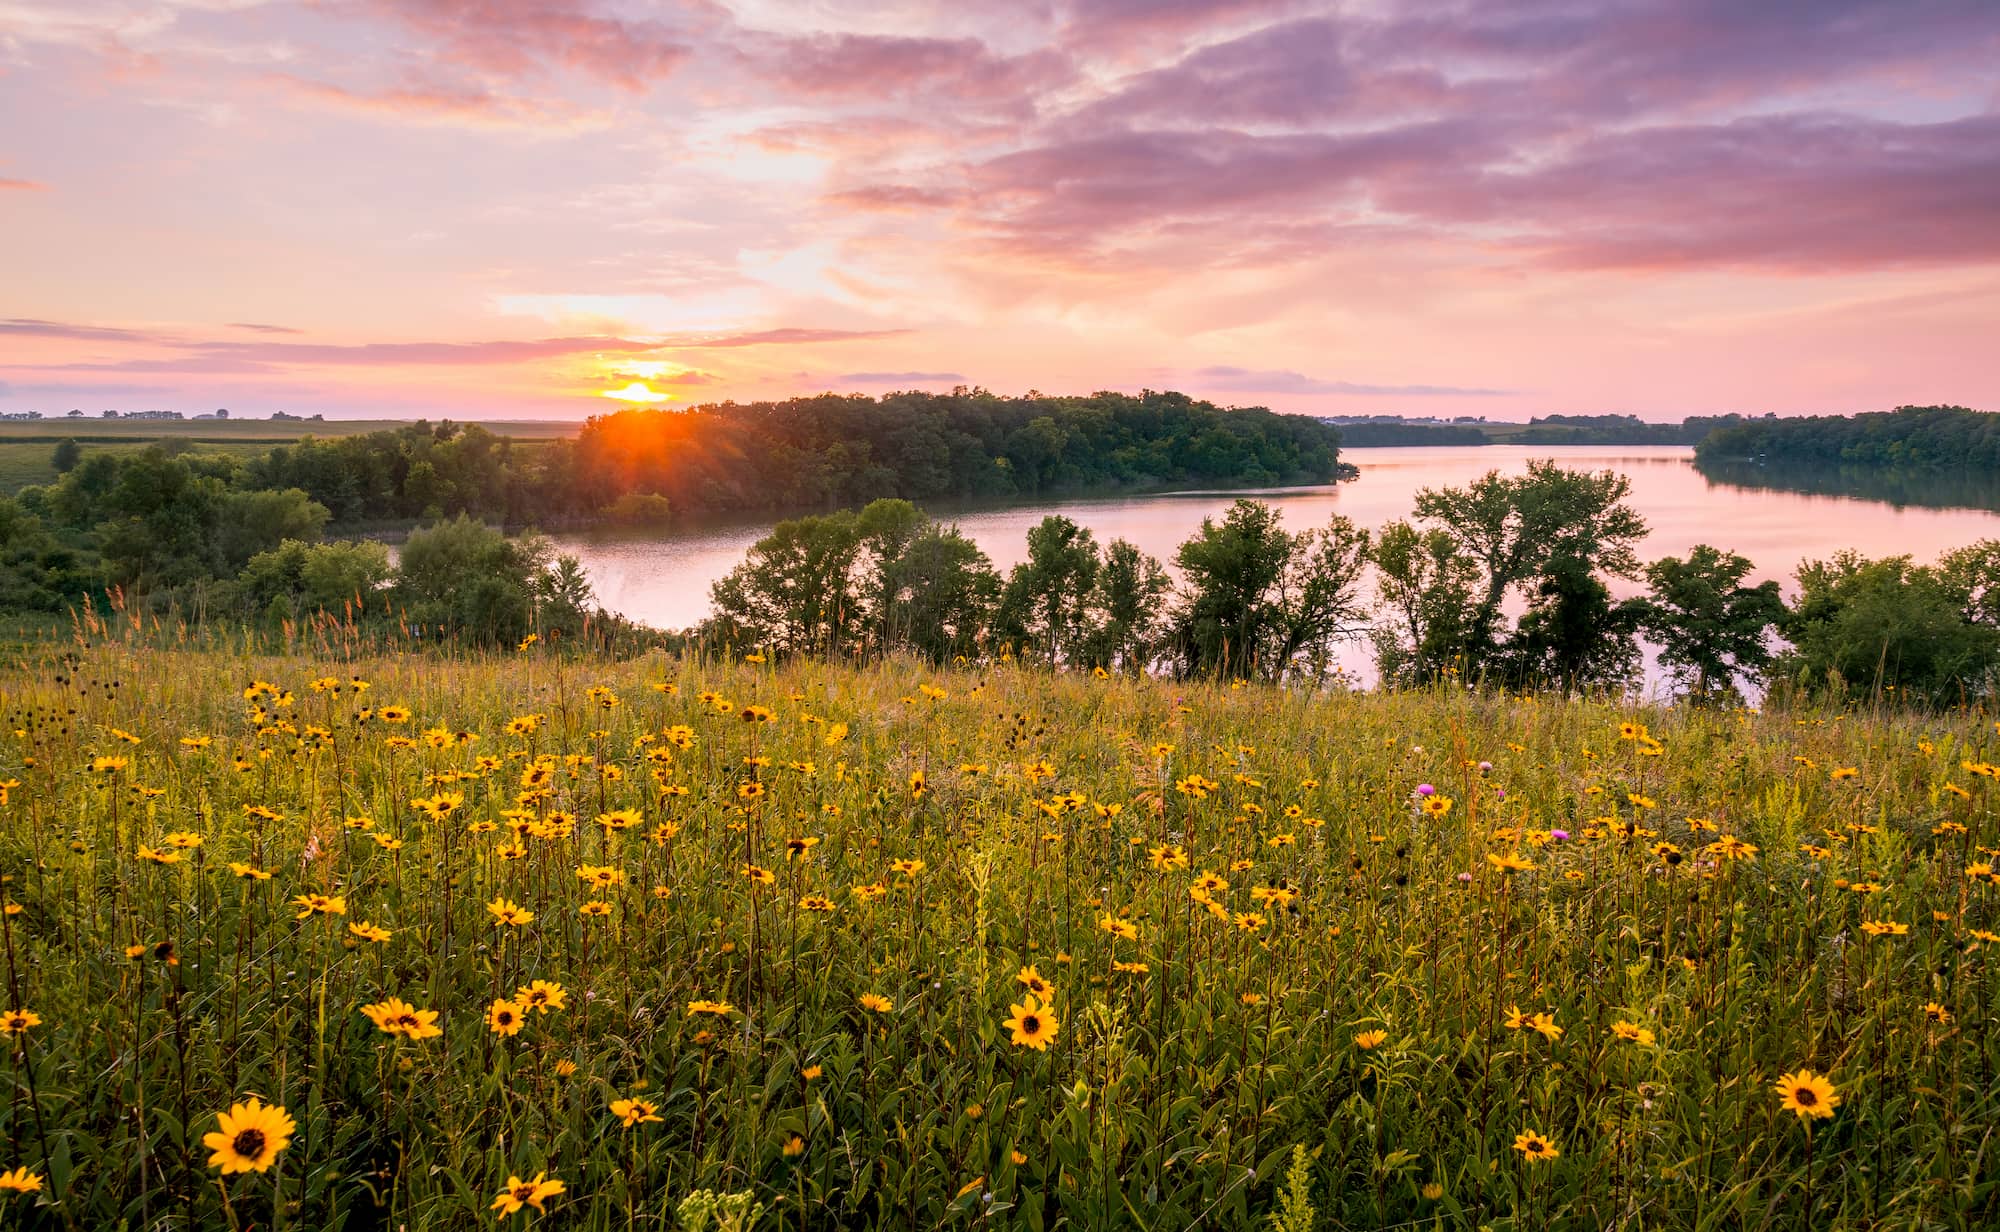 Wildflowers in field with Minnesota waterway and sunset in background